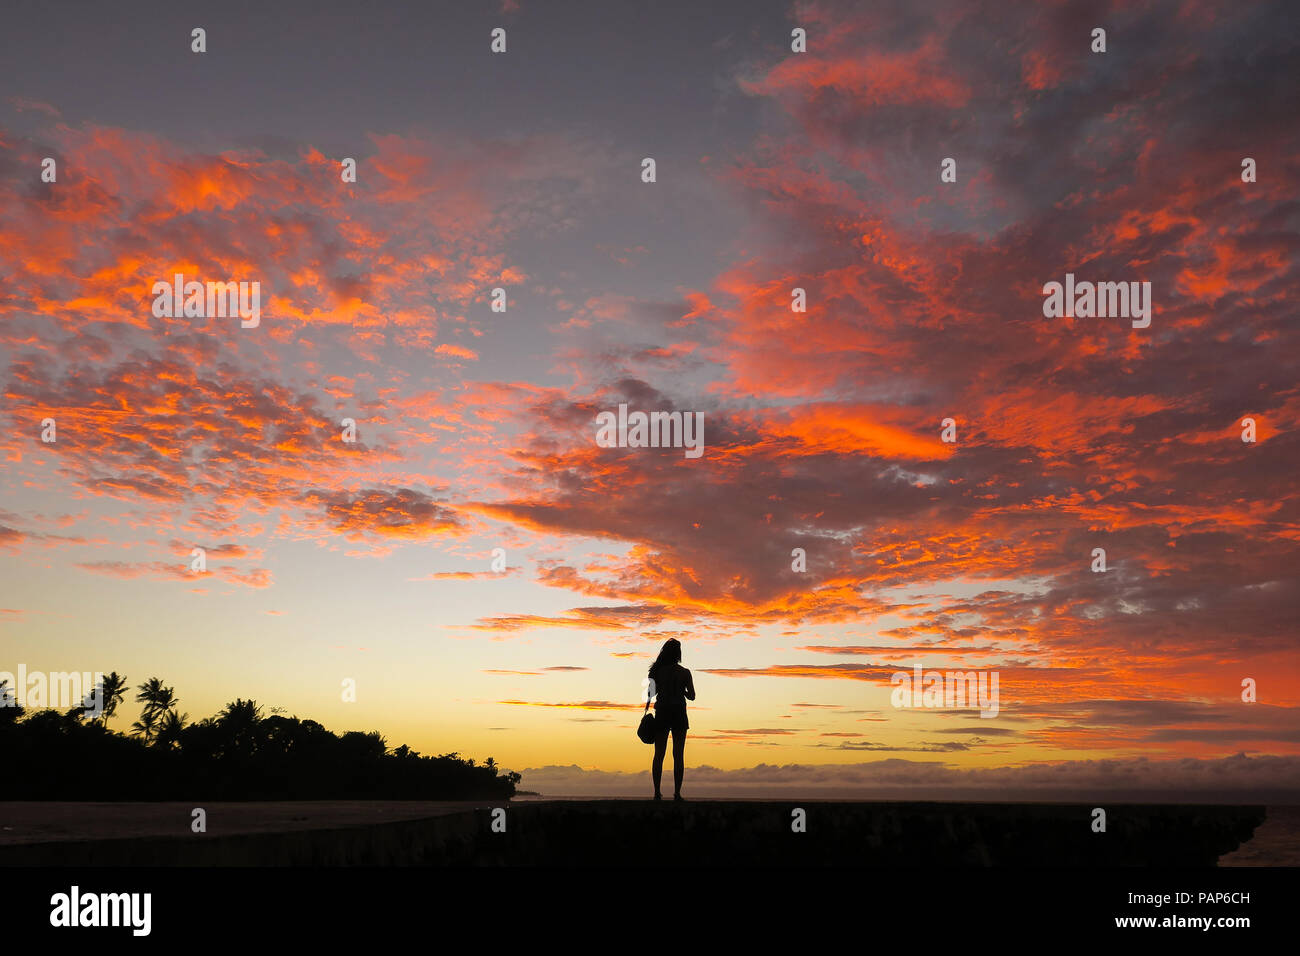 Island Tourist Girl Silhouette With Stunning Pink Sunset Clouds - Bohol, Philippines Stock Photo